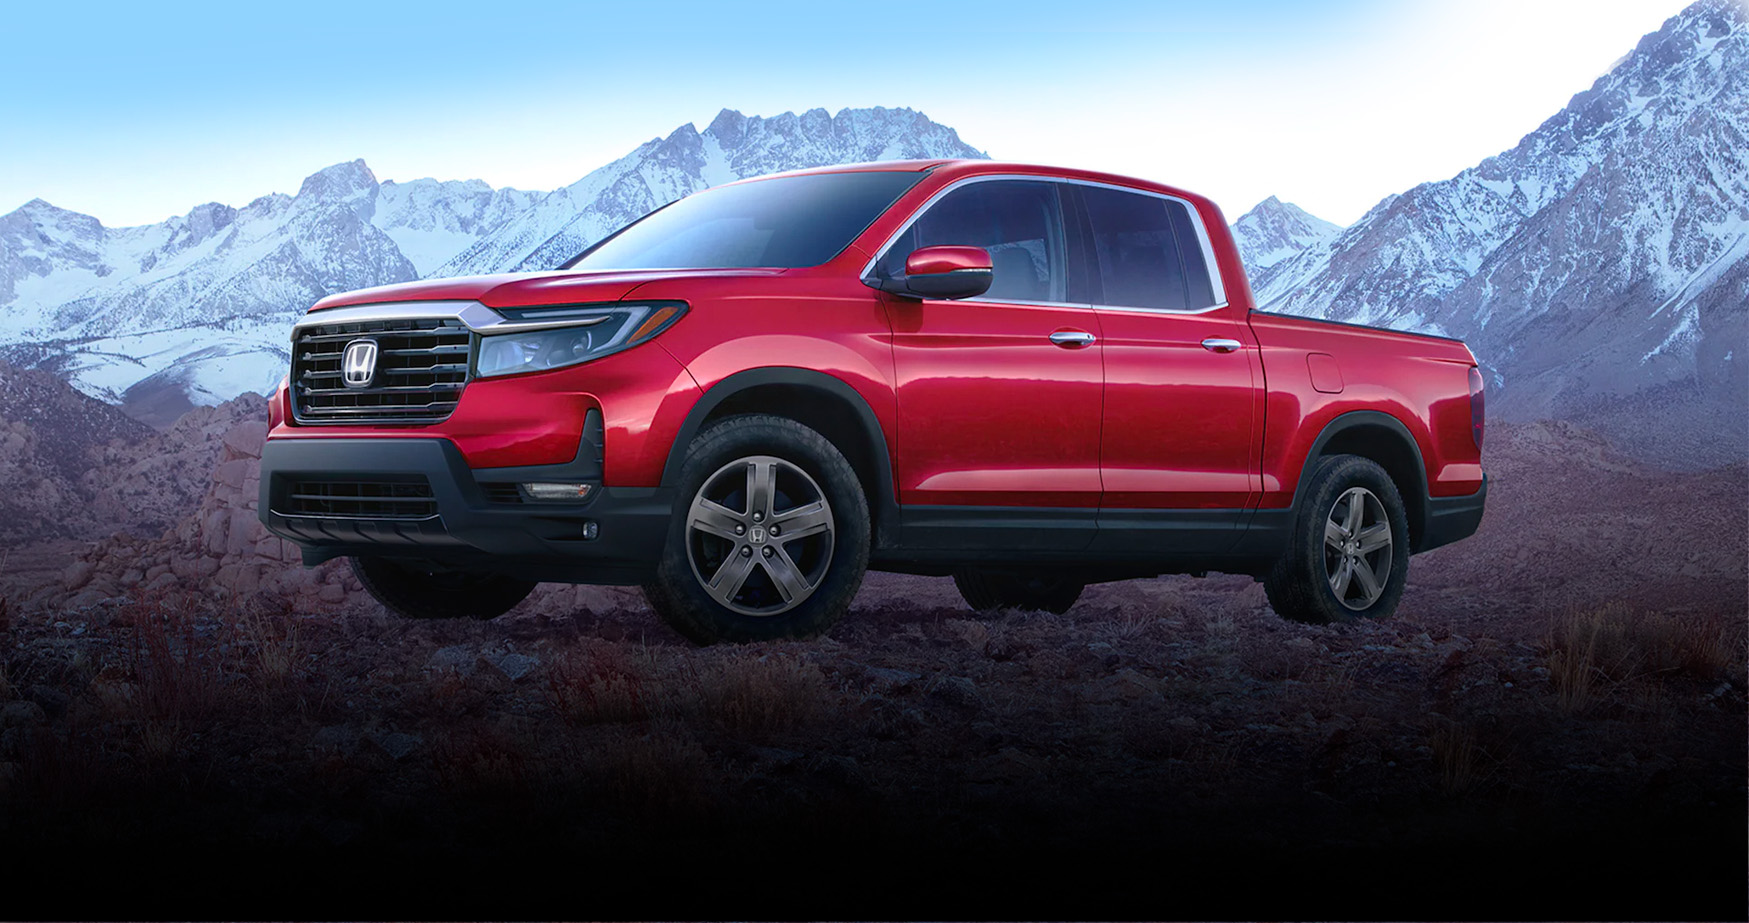 This is your chance to snap up the latest Honda Ridgeline. The Honda Ridgeline for Sale offers you many features in one SUV.